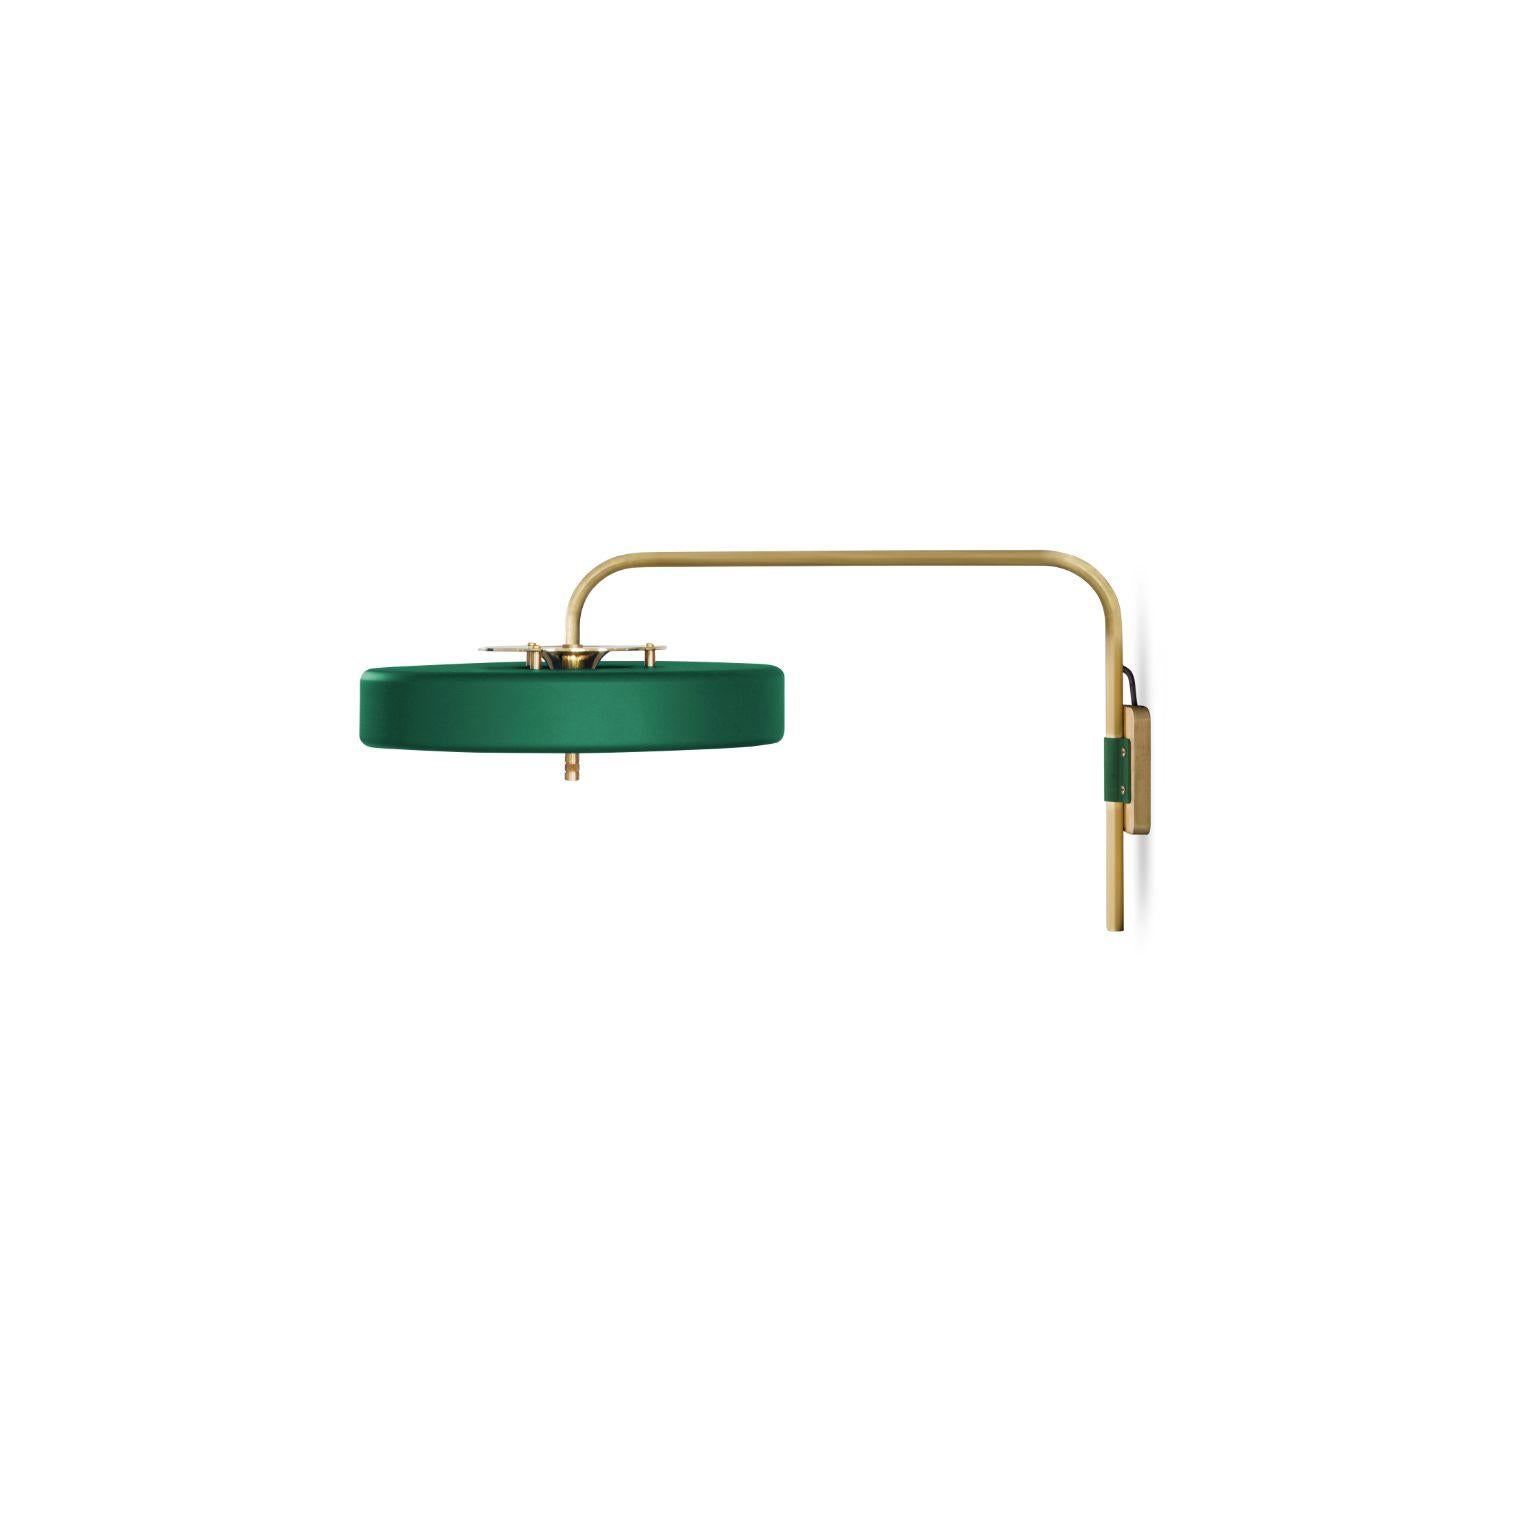 Revolve wall light - brushed brass - green by Bert Frank
Dimensions: 31 x 63 x 35 cm
Materials: Brass, Steel

Available in polished brass

Flush-fitting opal glass shade with central dome of polished marble – white Carrara or green Guatemala – held